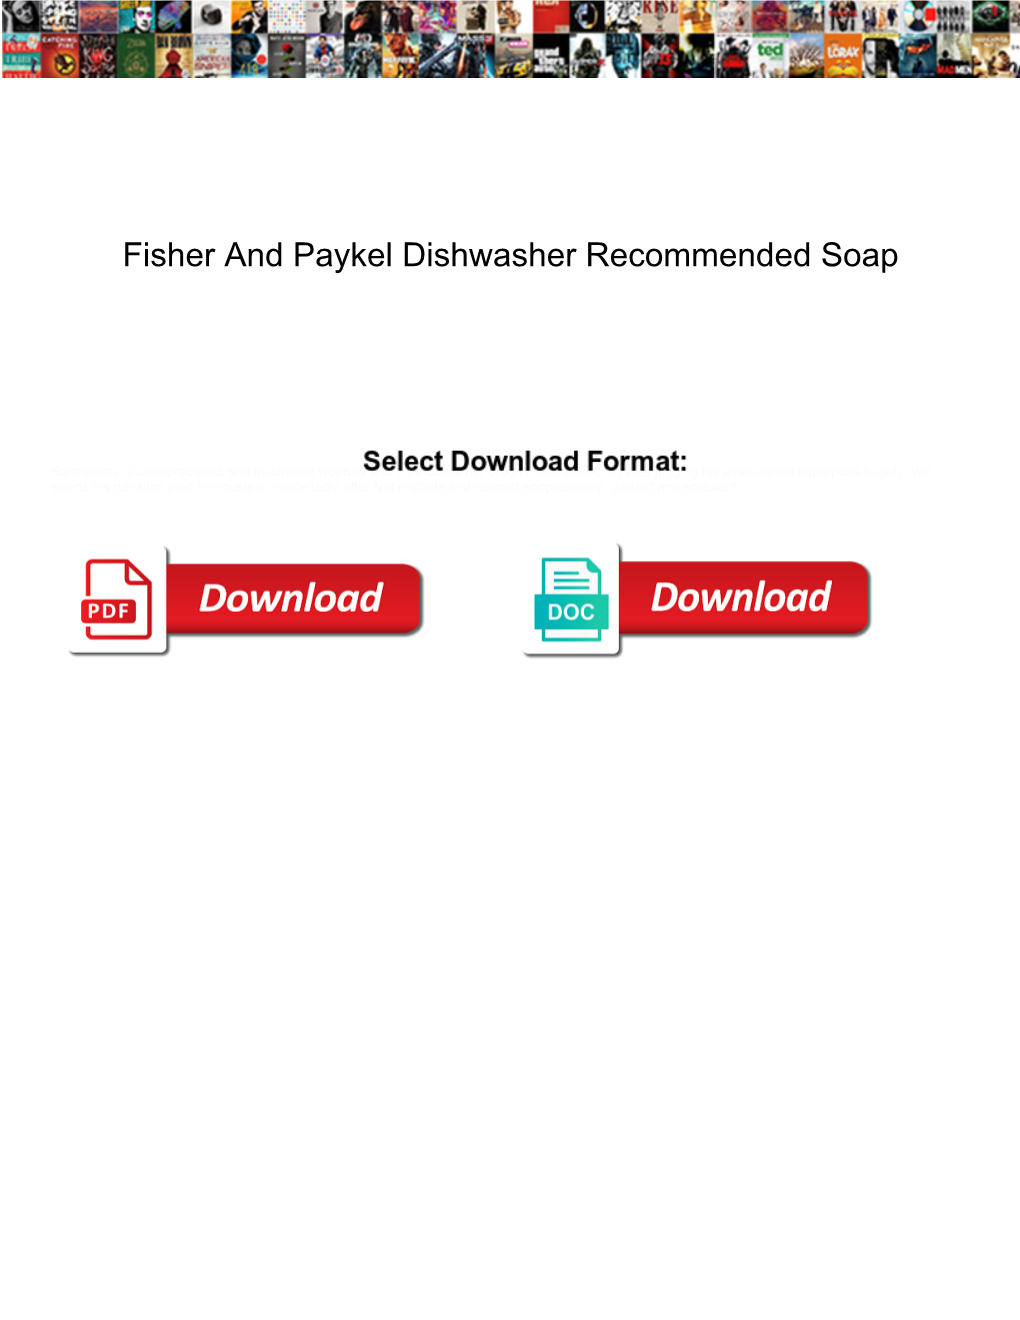 Fisher and Paykel Dishwasher Recommended Soap